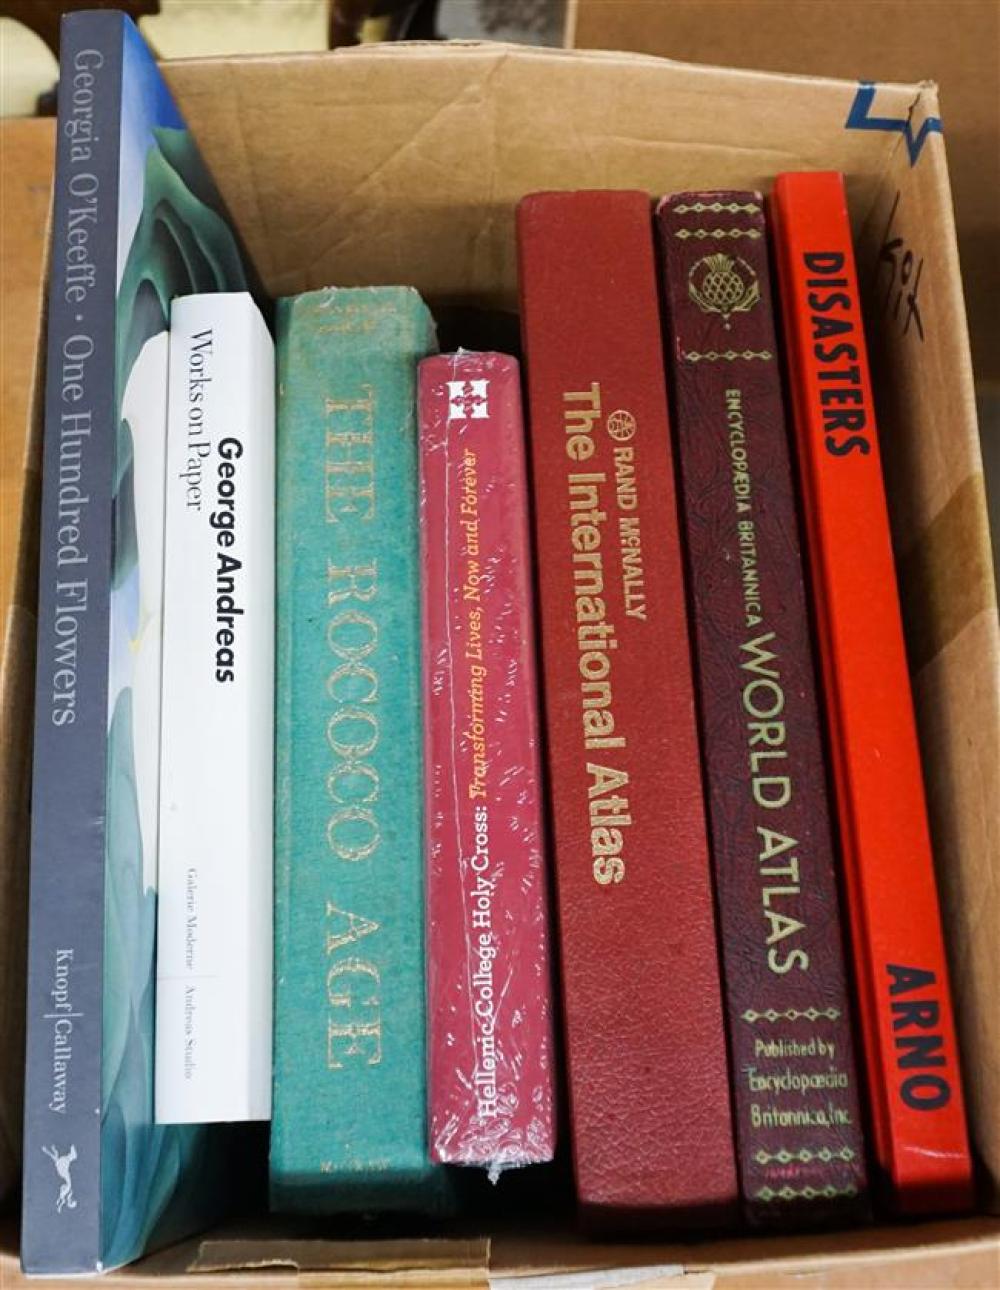 BOX WITH SIX BOOKSBox with Six Books